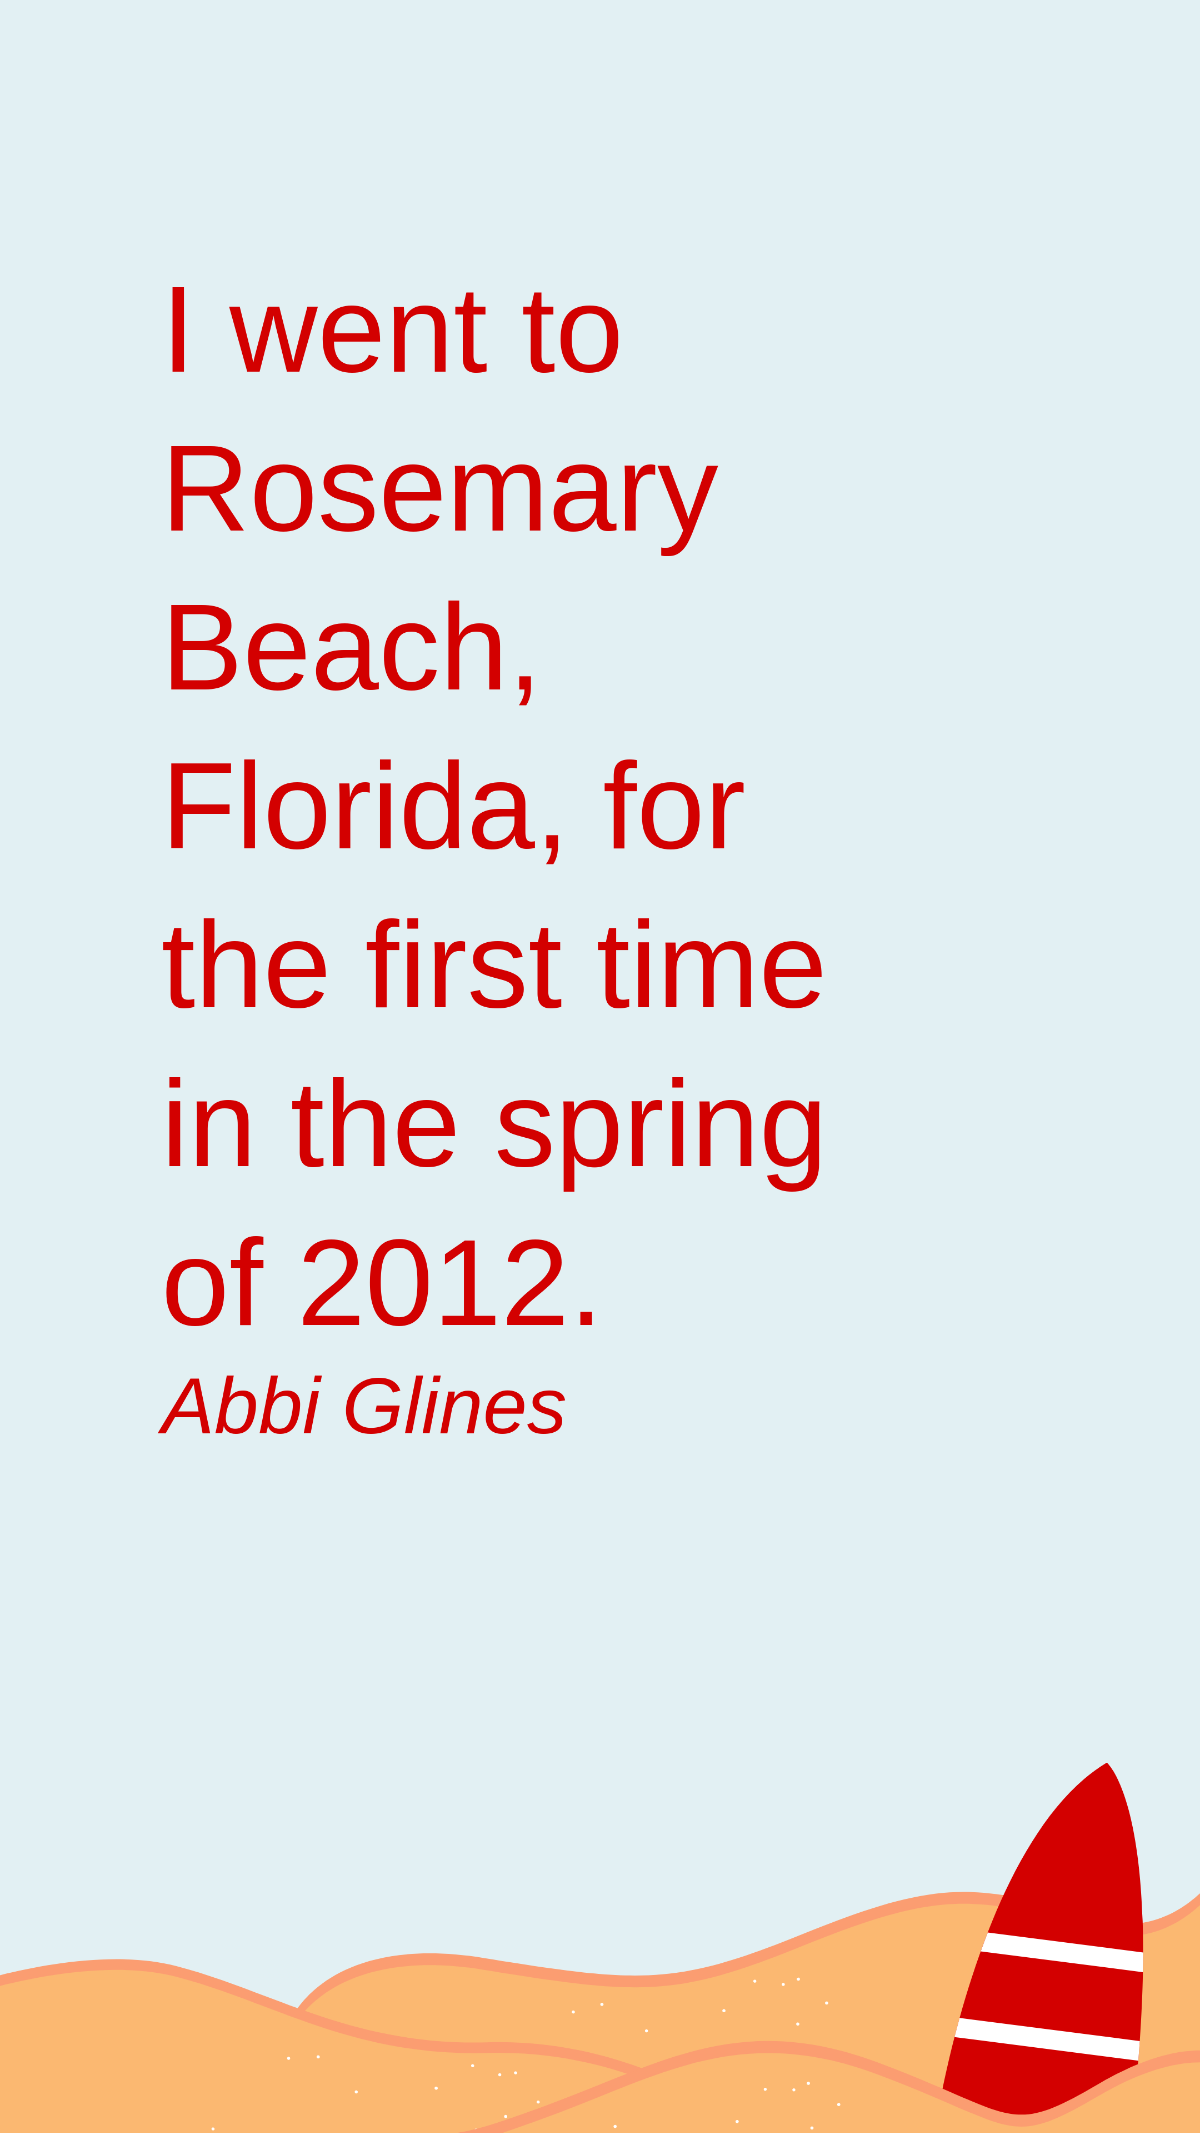 Abbi Glines - I went to Rosemary Beach, Florida, for the first time in the spring of 2012. Template